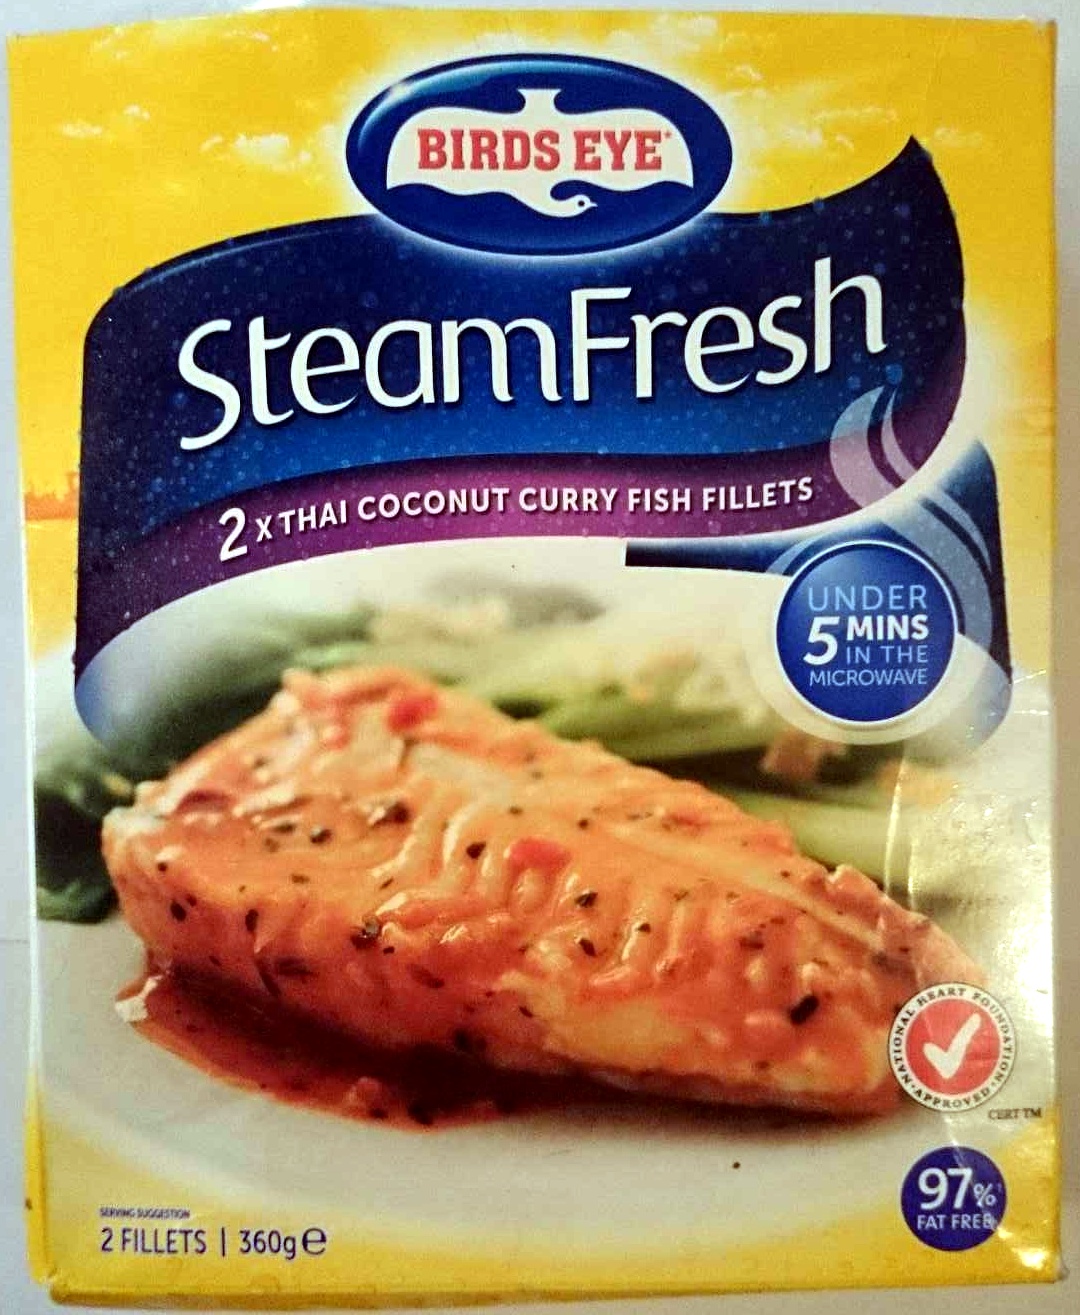 Steam Fresh 2x Thai Coconut Curry Fish Fillets - Product